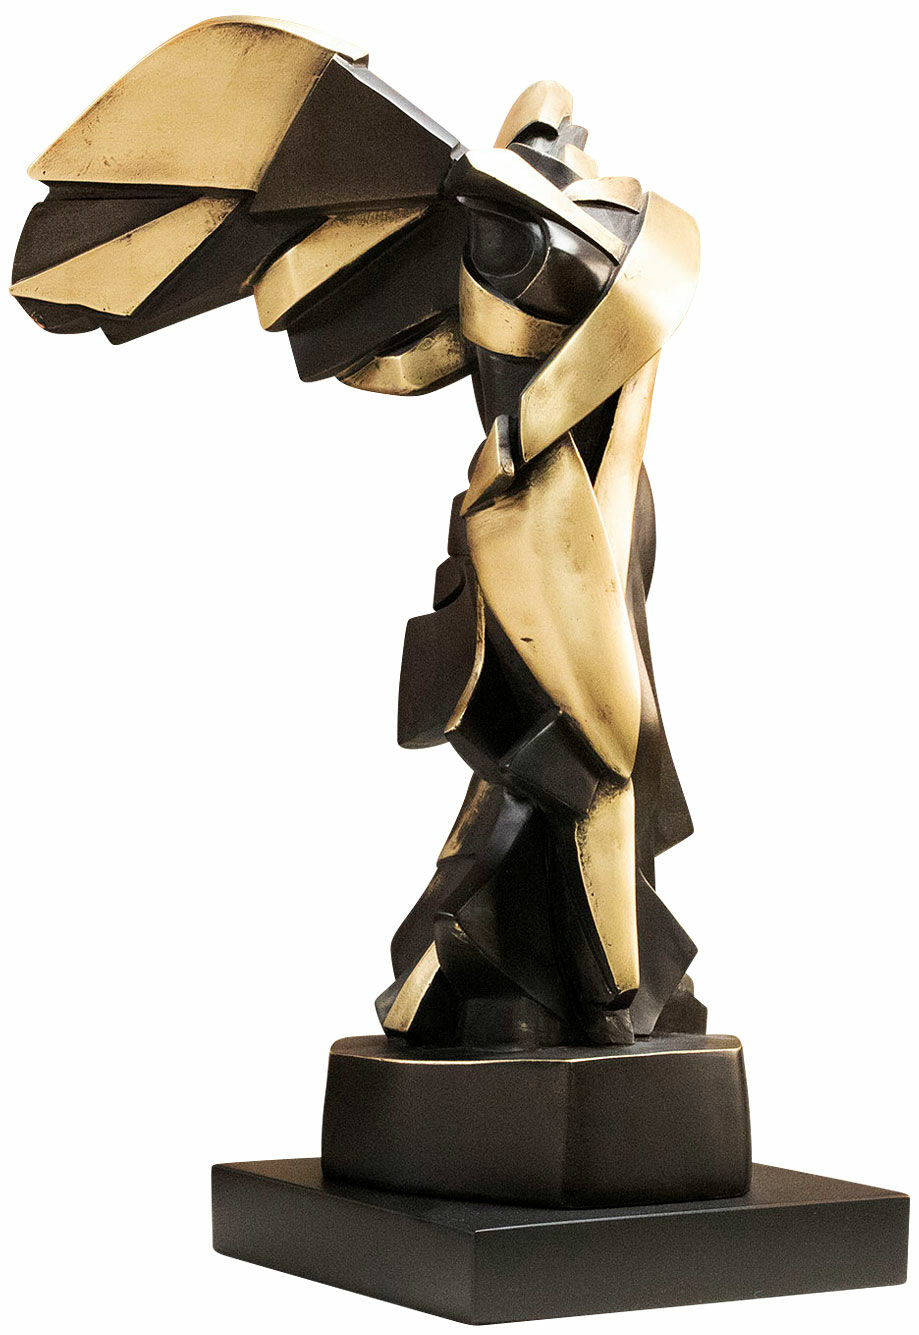 Sculpture "Harmony of Samothrace", nickel-plated copper by Miguel Guía